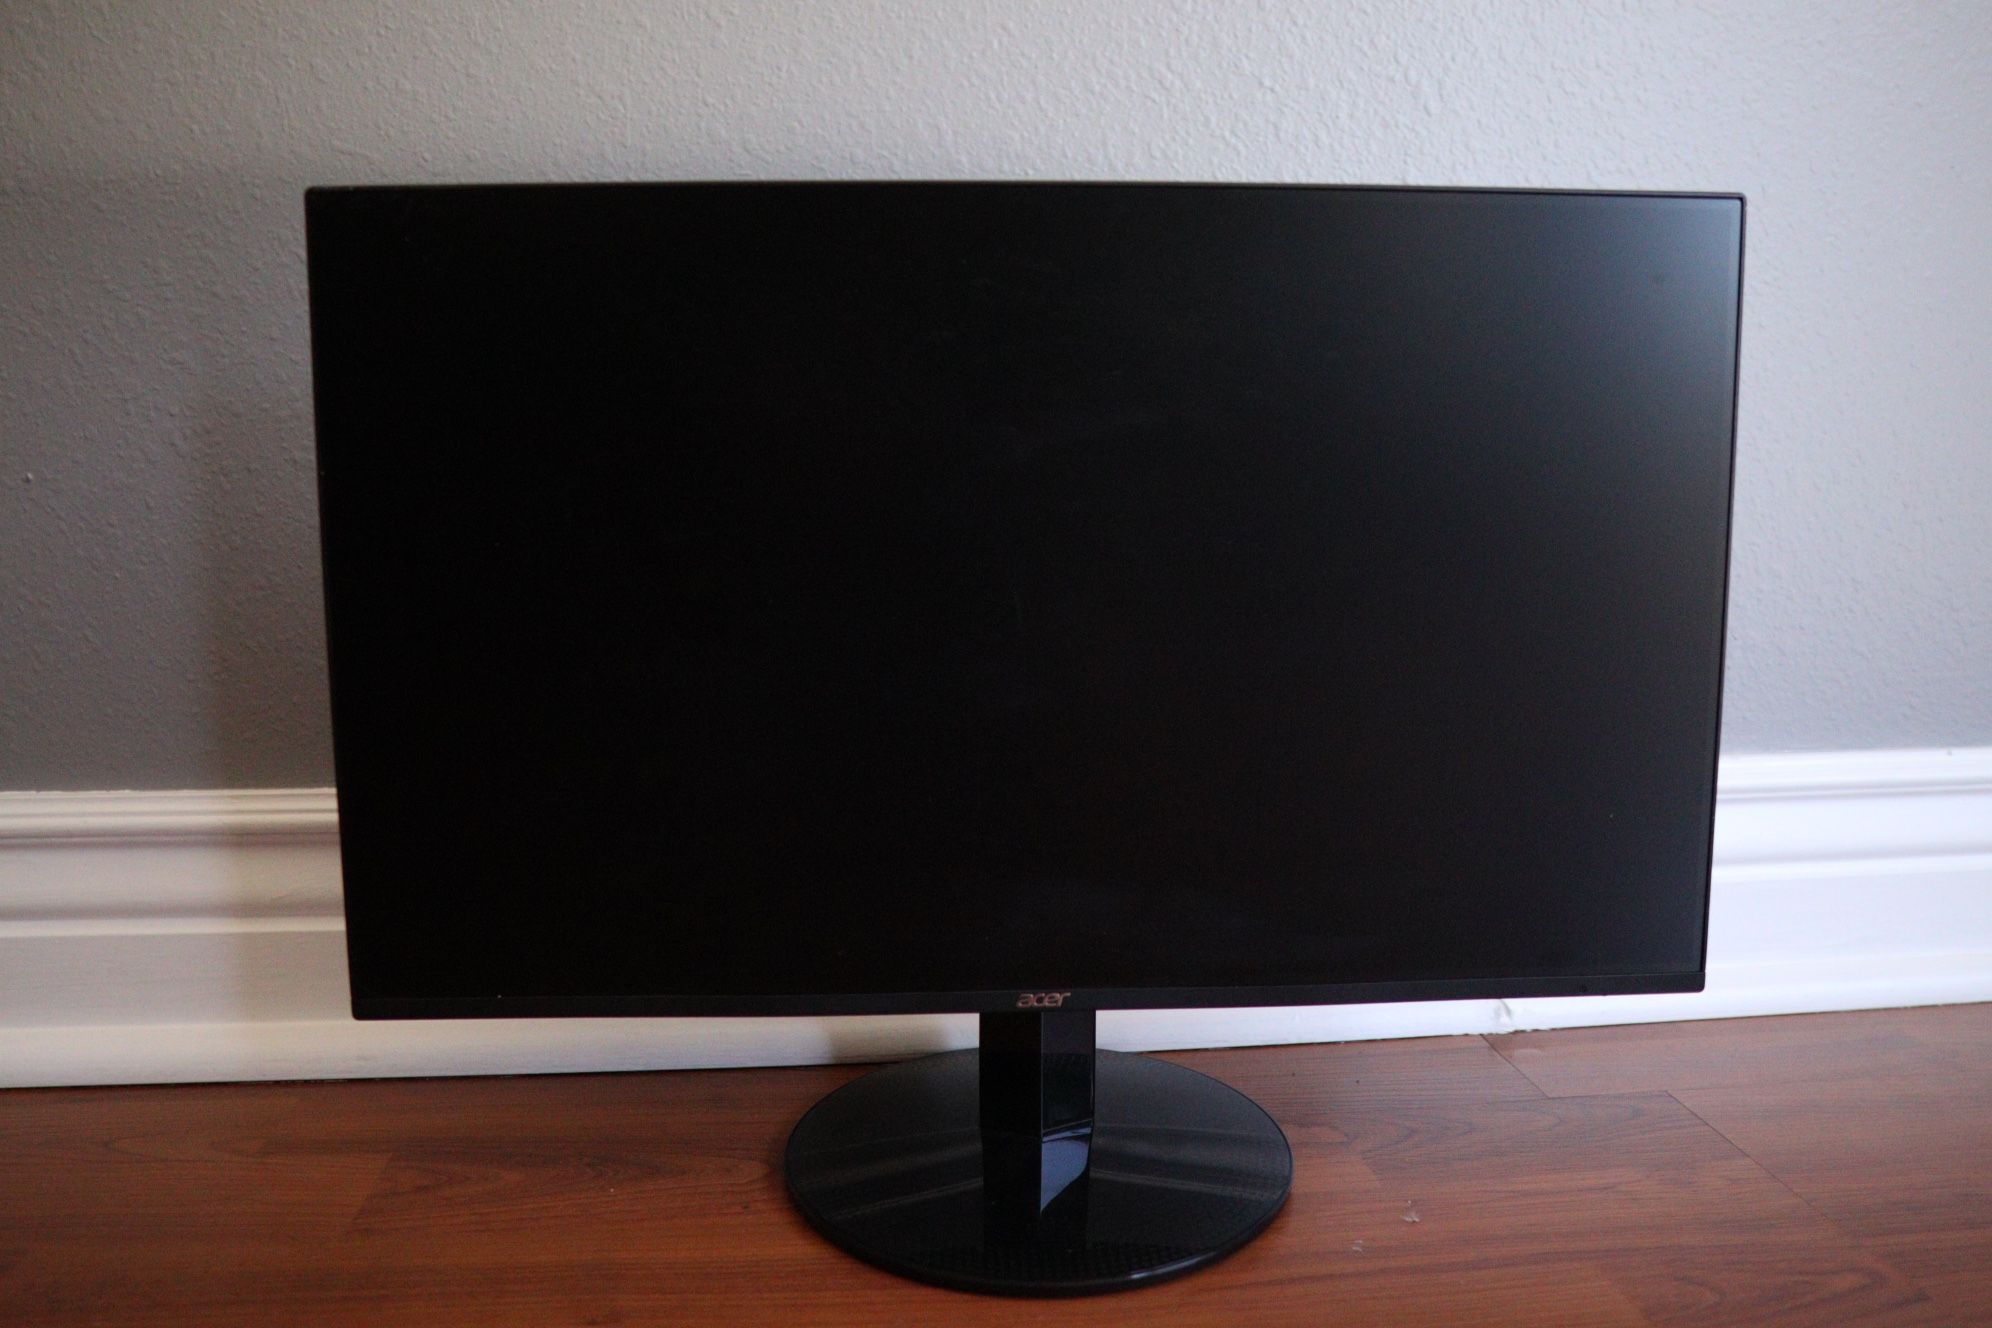 24” Acer Monitor.